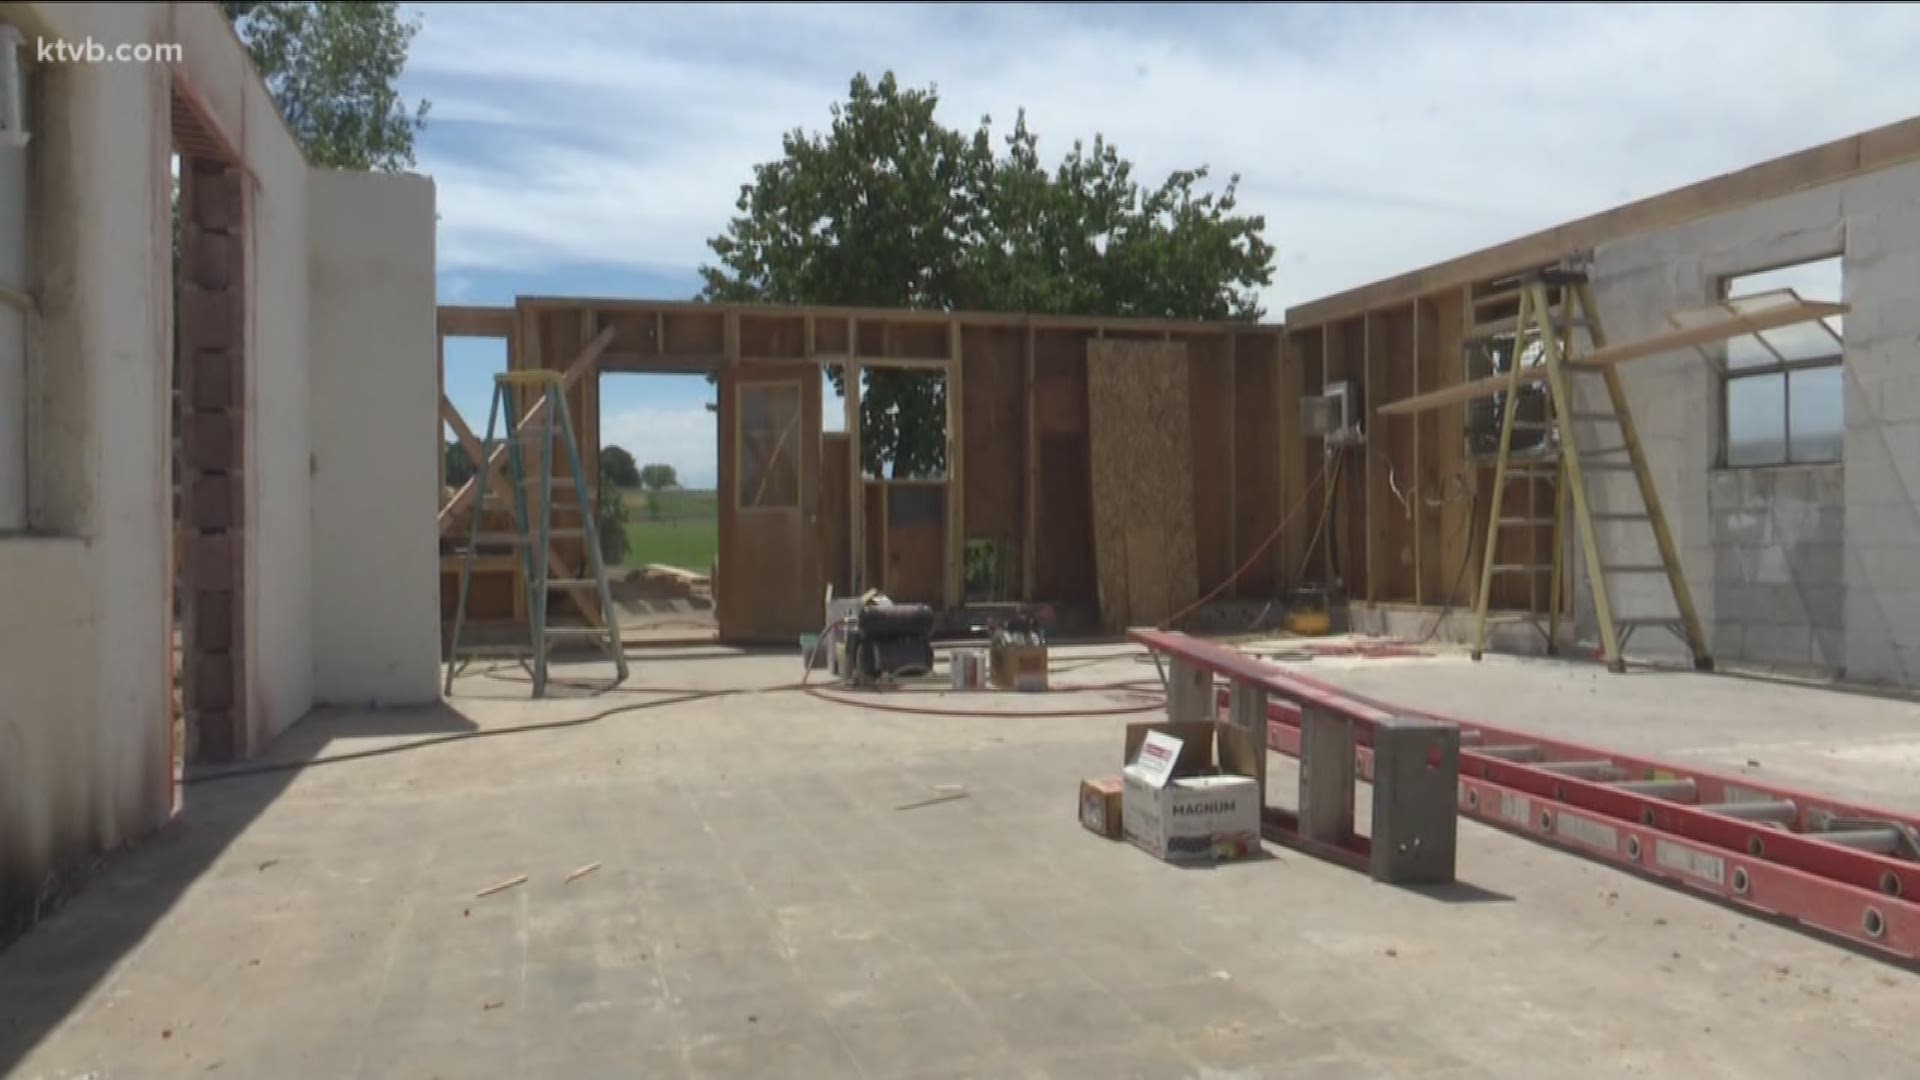 Canyon County Habitat for Humanity is helping out a Vietnam War veteran by building him a new home in Fruittland.